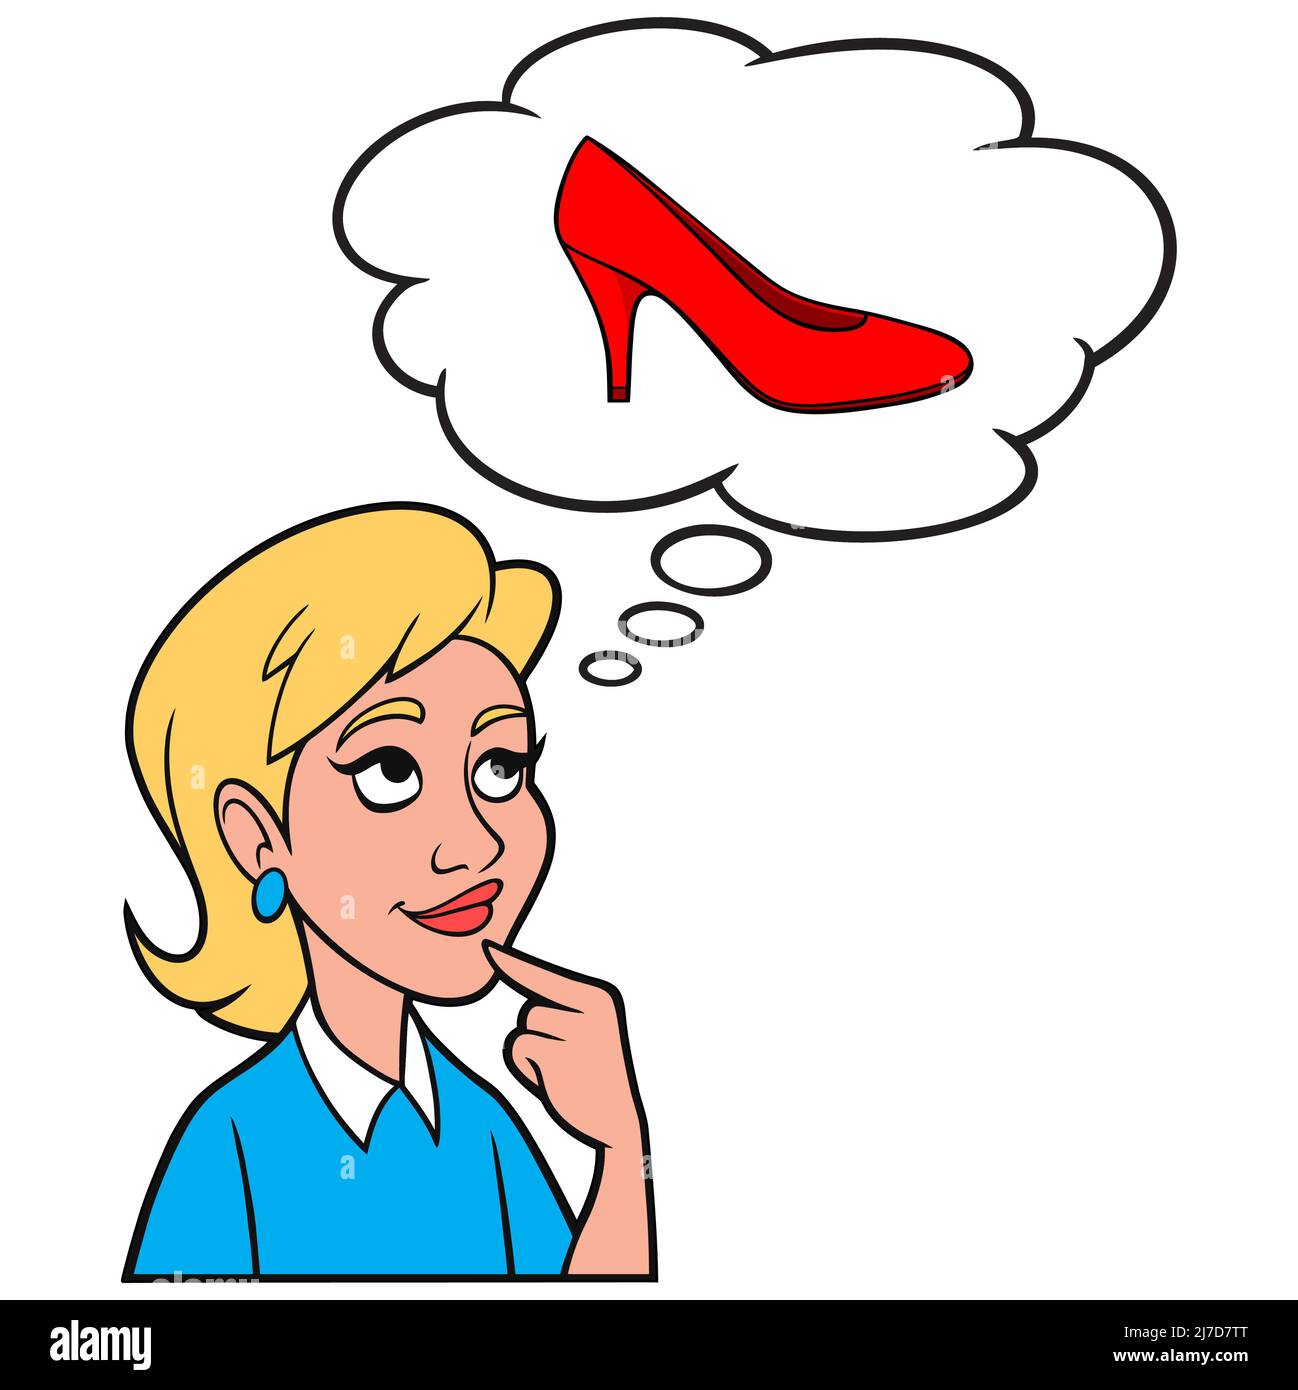 Girl thinking about Ladies Dress Shoes - A cartoon illustration of a Girl thinking about Ladies Dress Shoes. Stock Vector